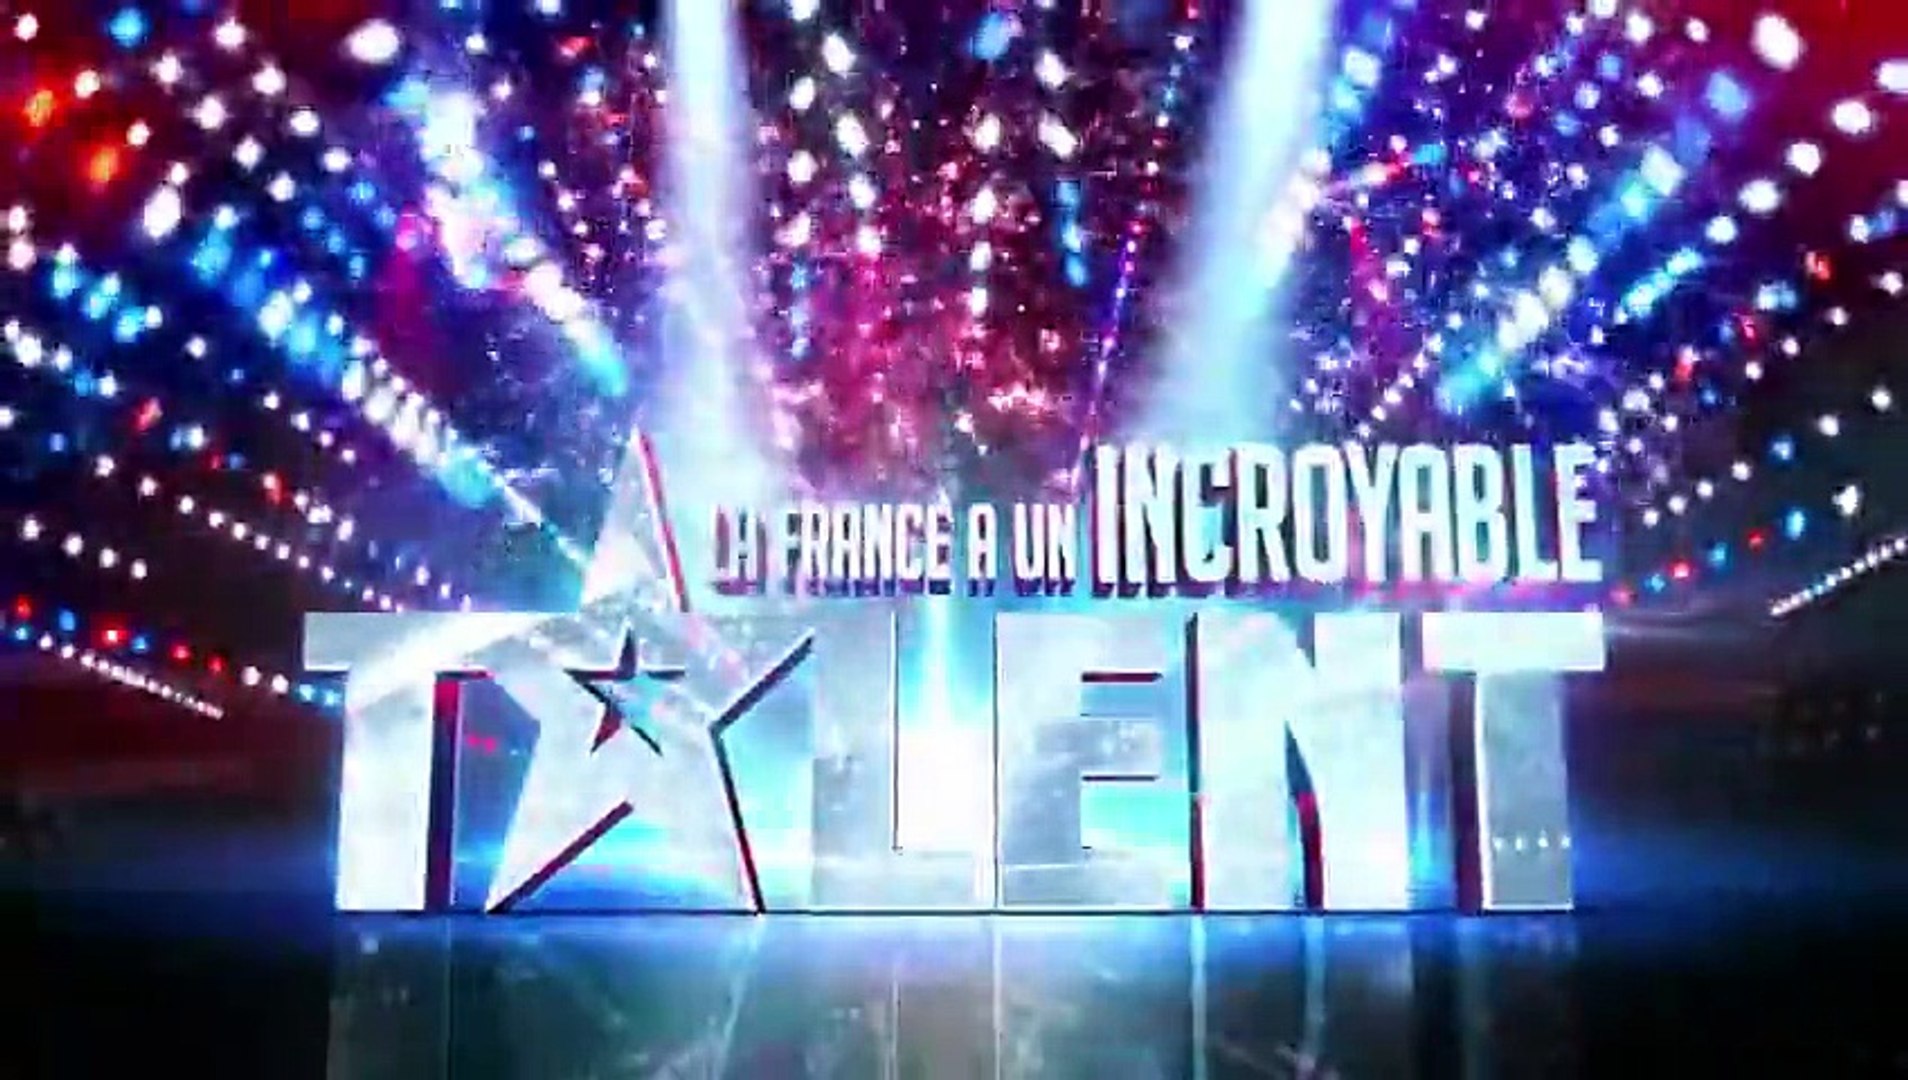 Amani the amazing 12 years old singer - Semi-Final 1 - France's Got Talent 2014